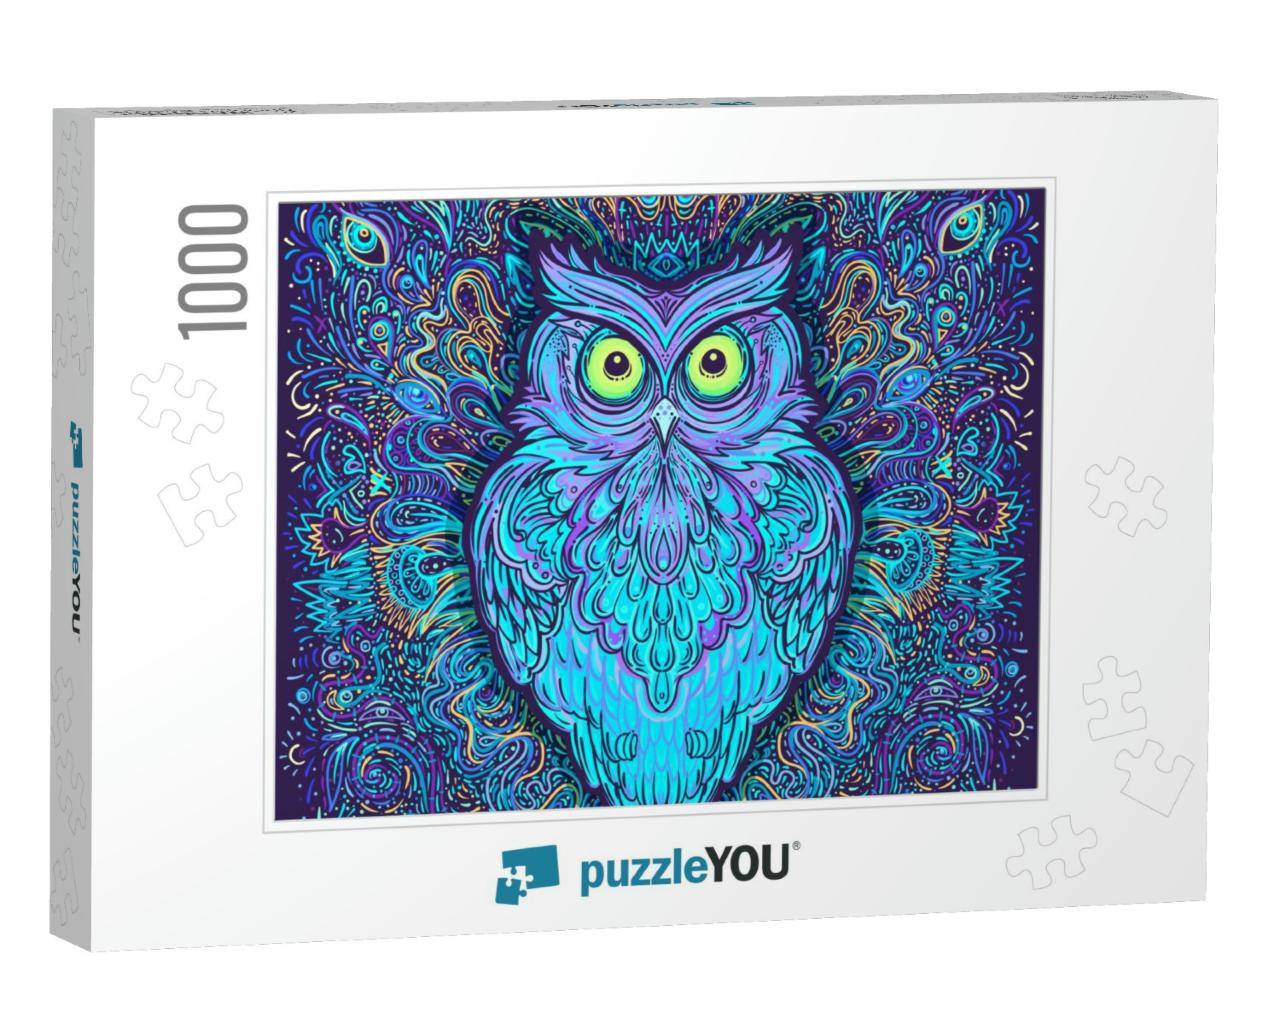 Cute Abstract Owl & Psychedelic Ornate Pattern. Character... Jigsaw Puzzle with 1000 pieces